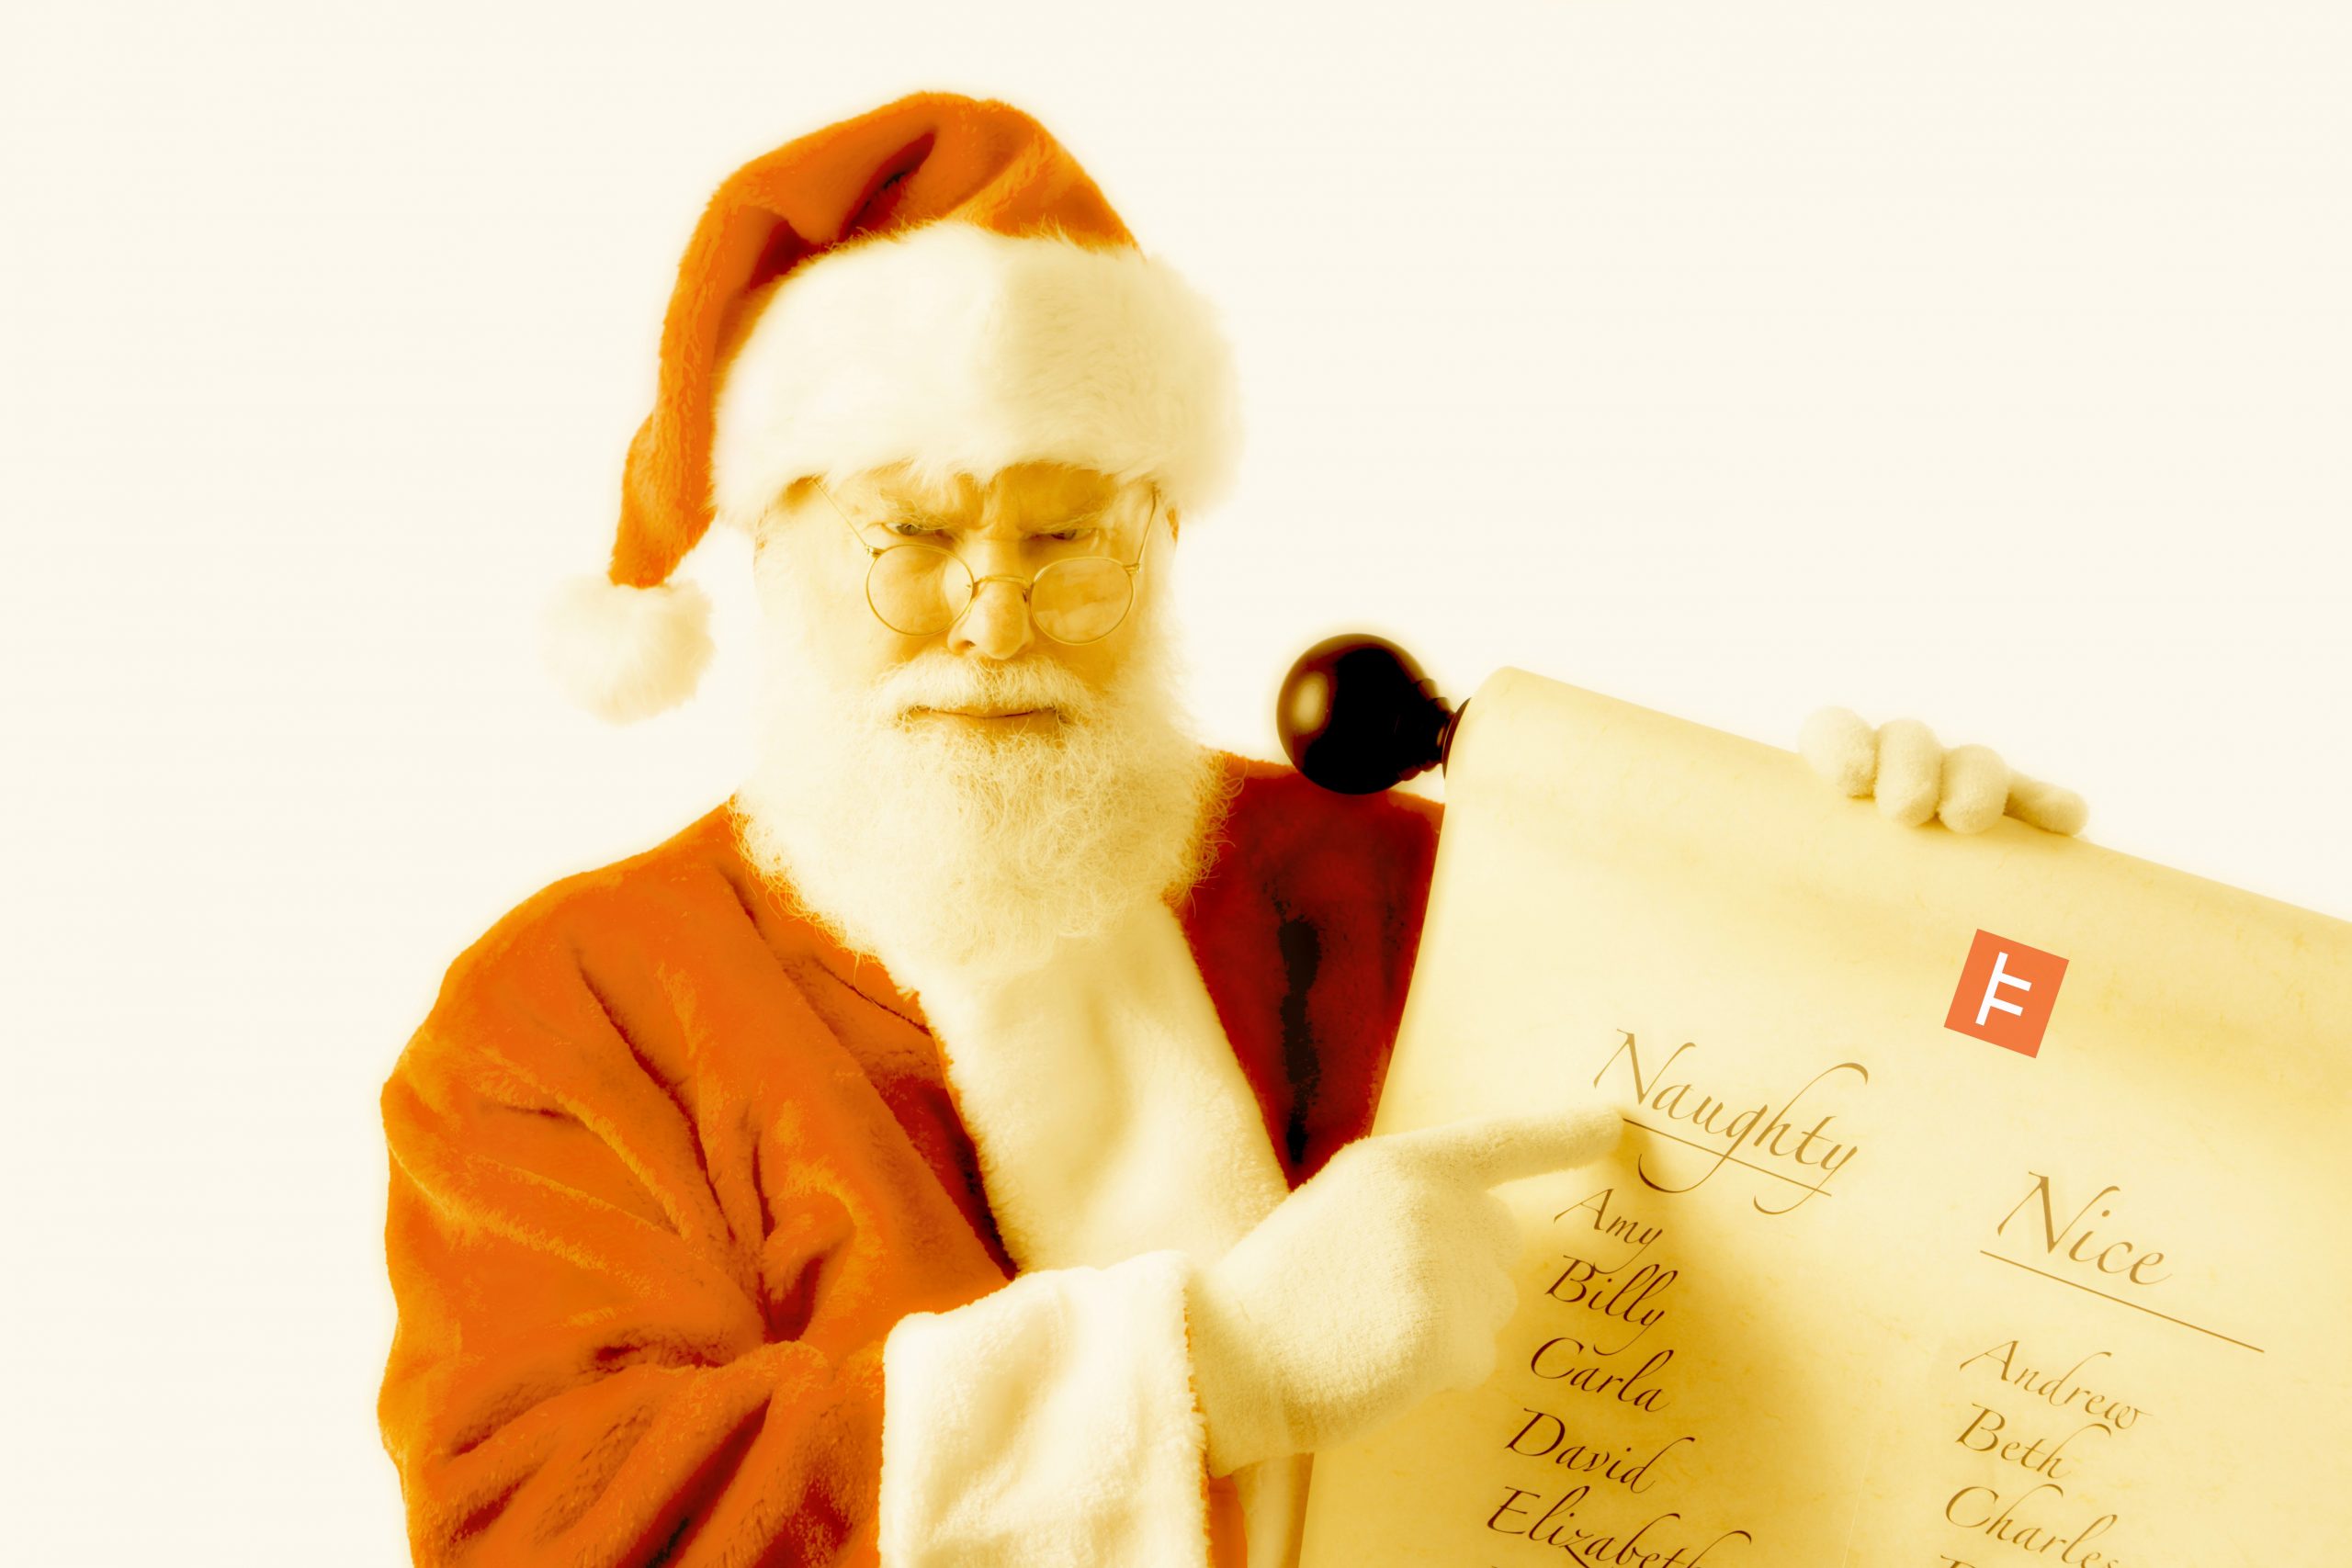 He’s Making A List, And Checking It Twice